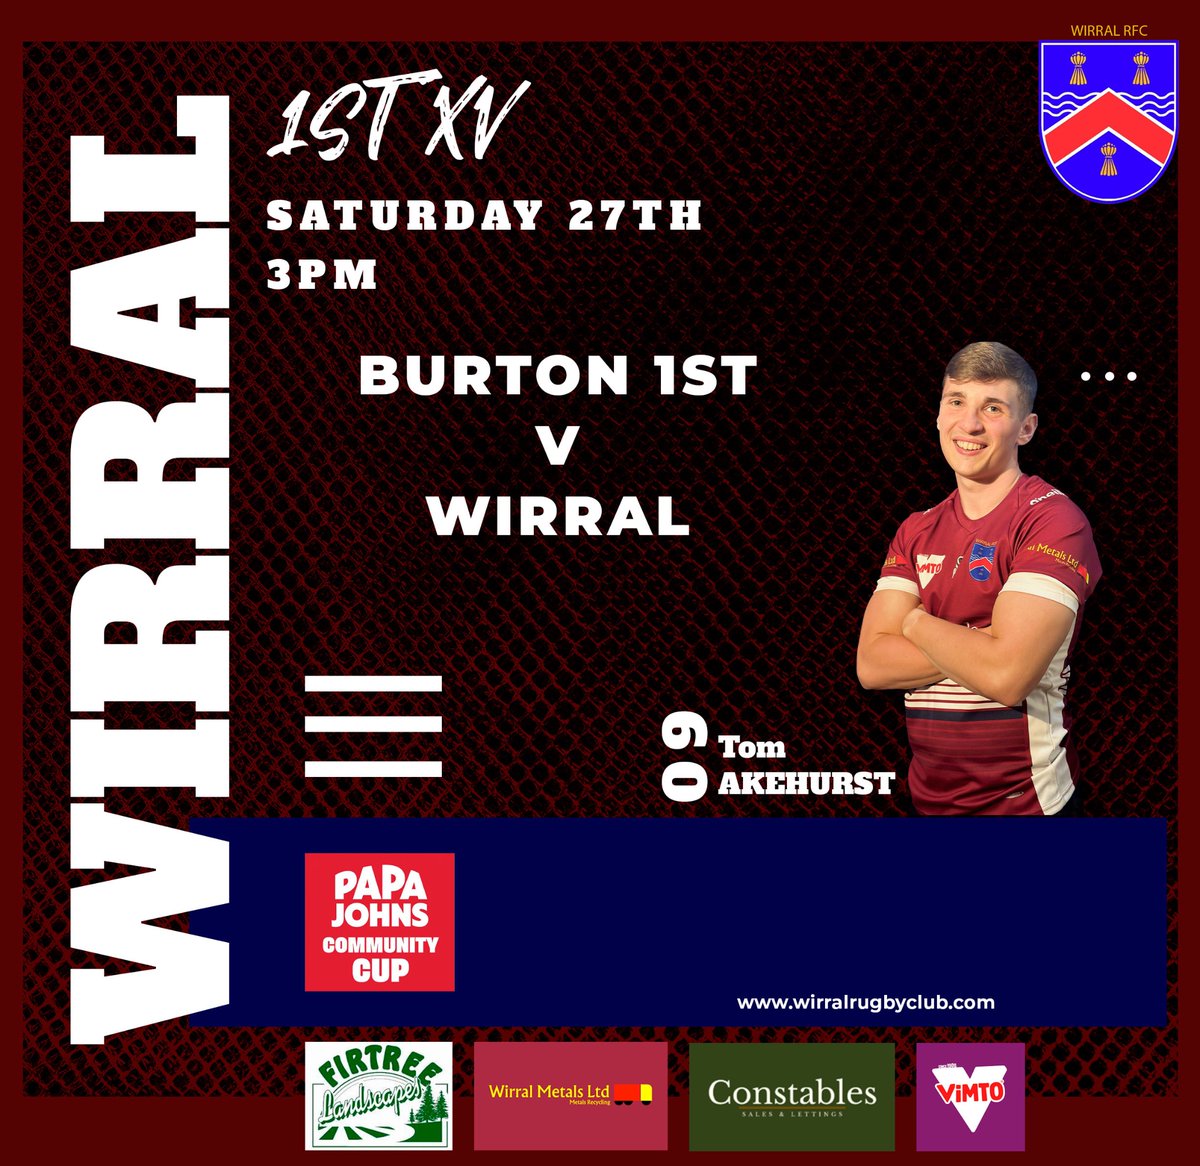 This weekend sees our 1st XV take on @BurtonRFC in what has become the decider for the group stage of the @PapaJohnsUK community cup. Get down and cheer on your maroon and whites as they pack down at memorial ground #maroonandwhite